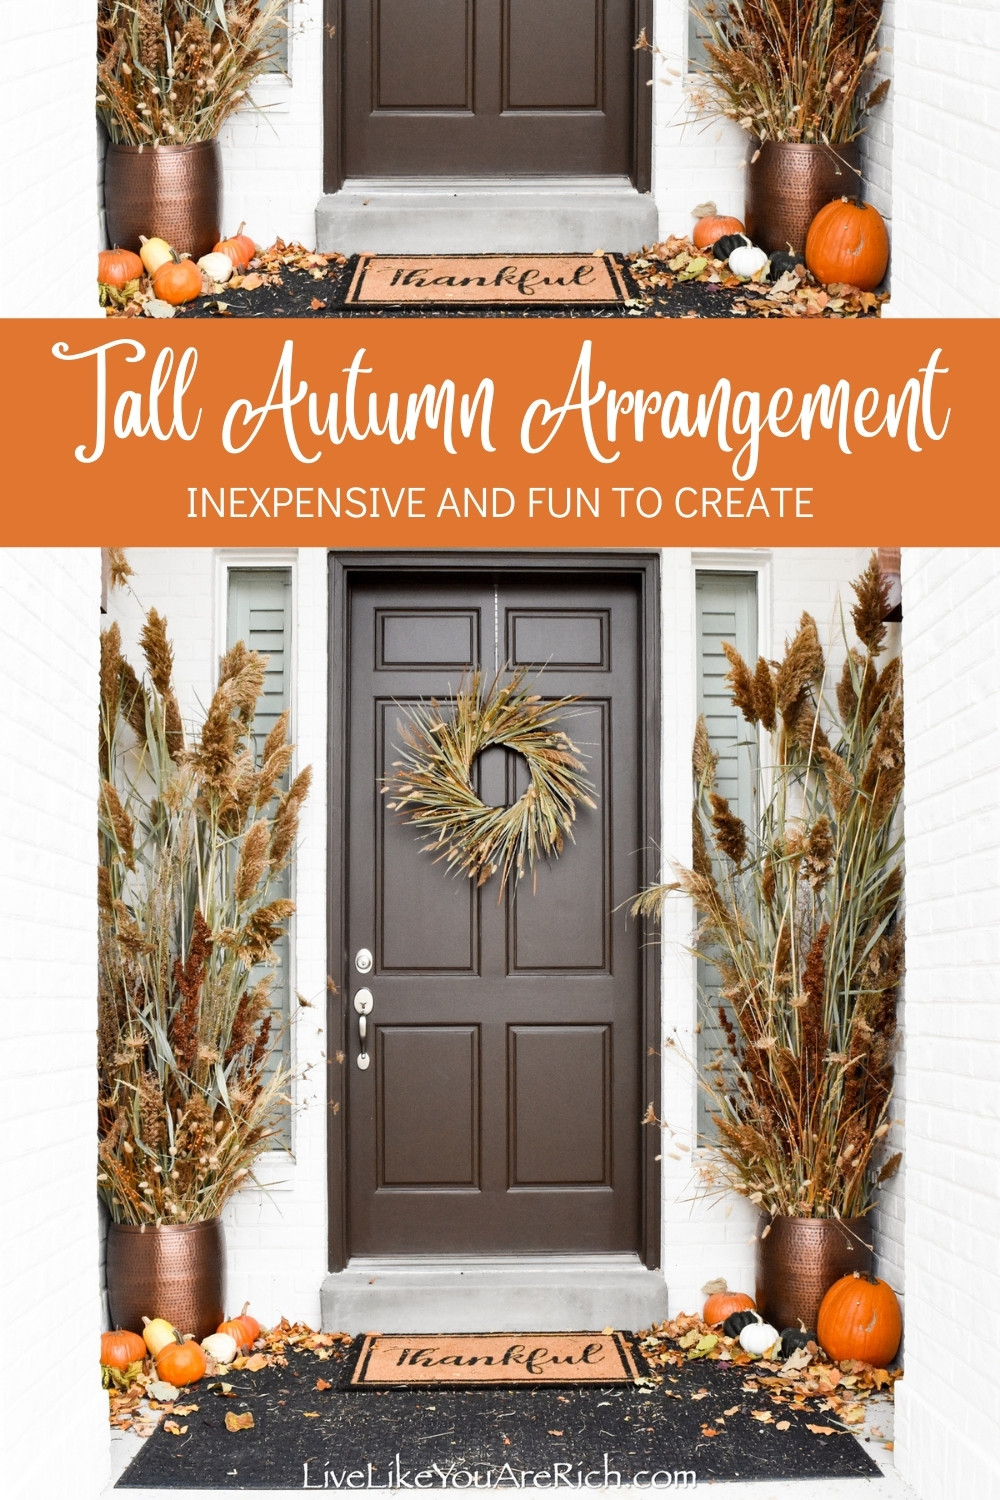 These Tall Autumn Arrangements were very inexpensive and fun to create.